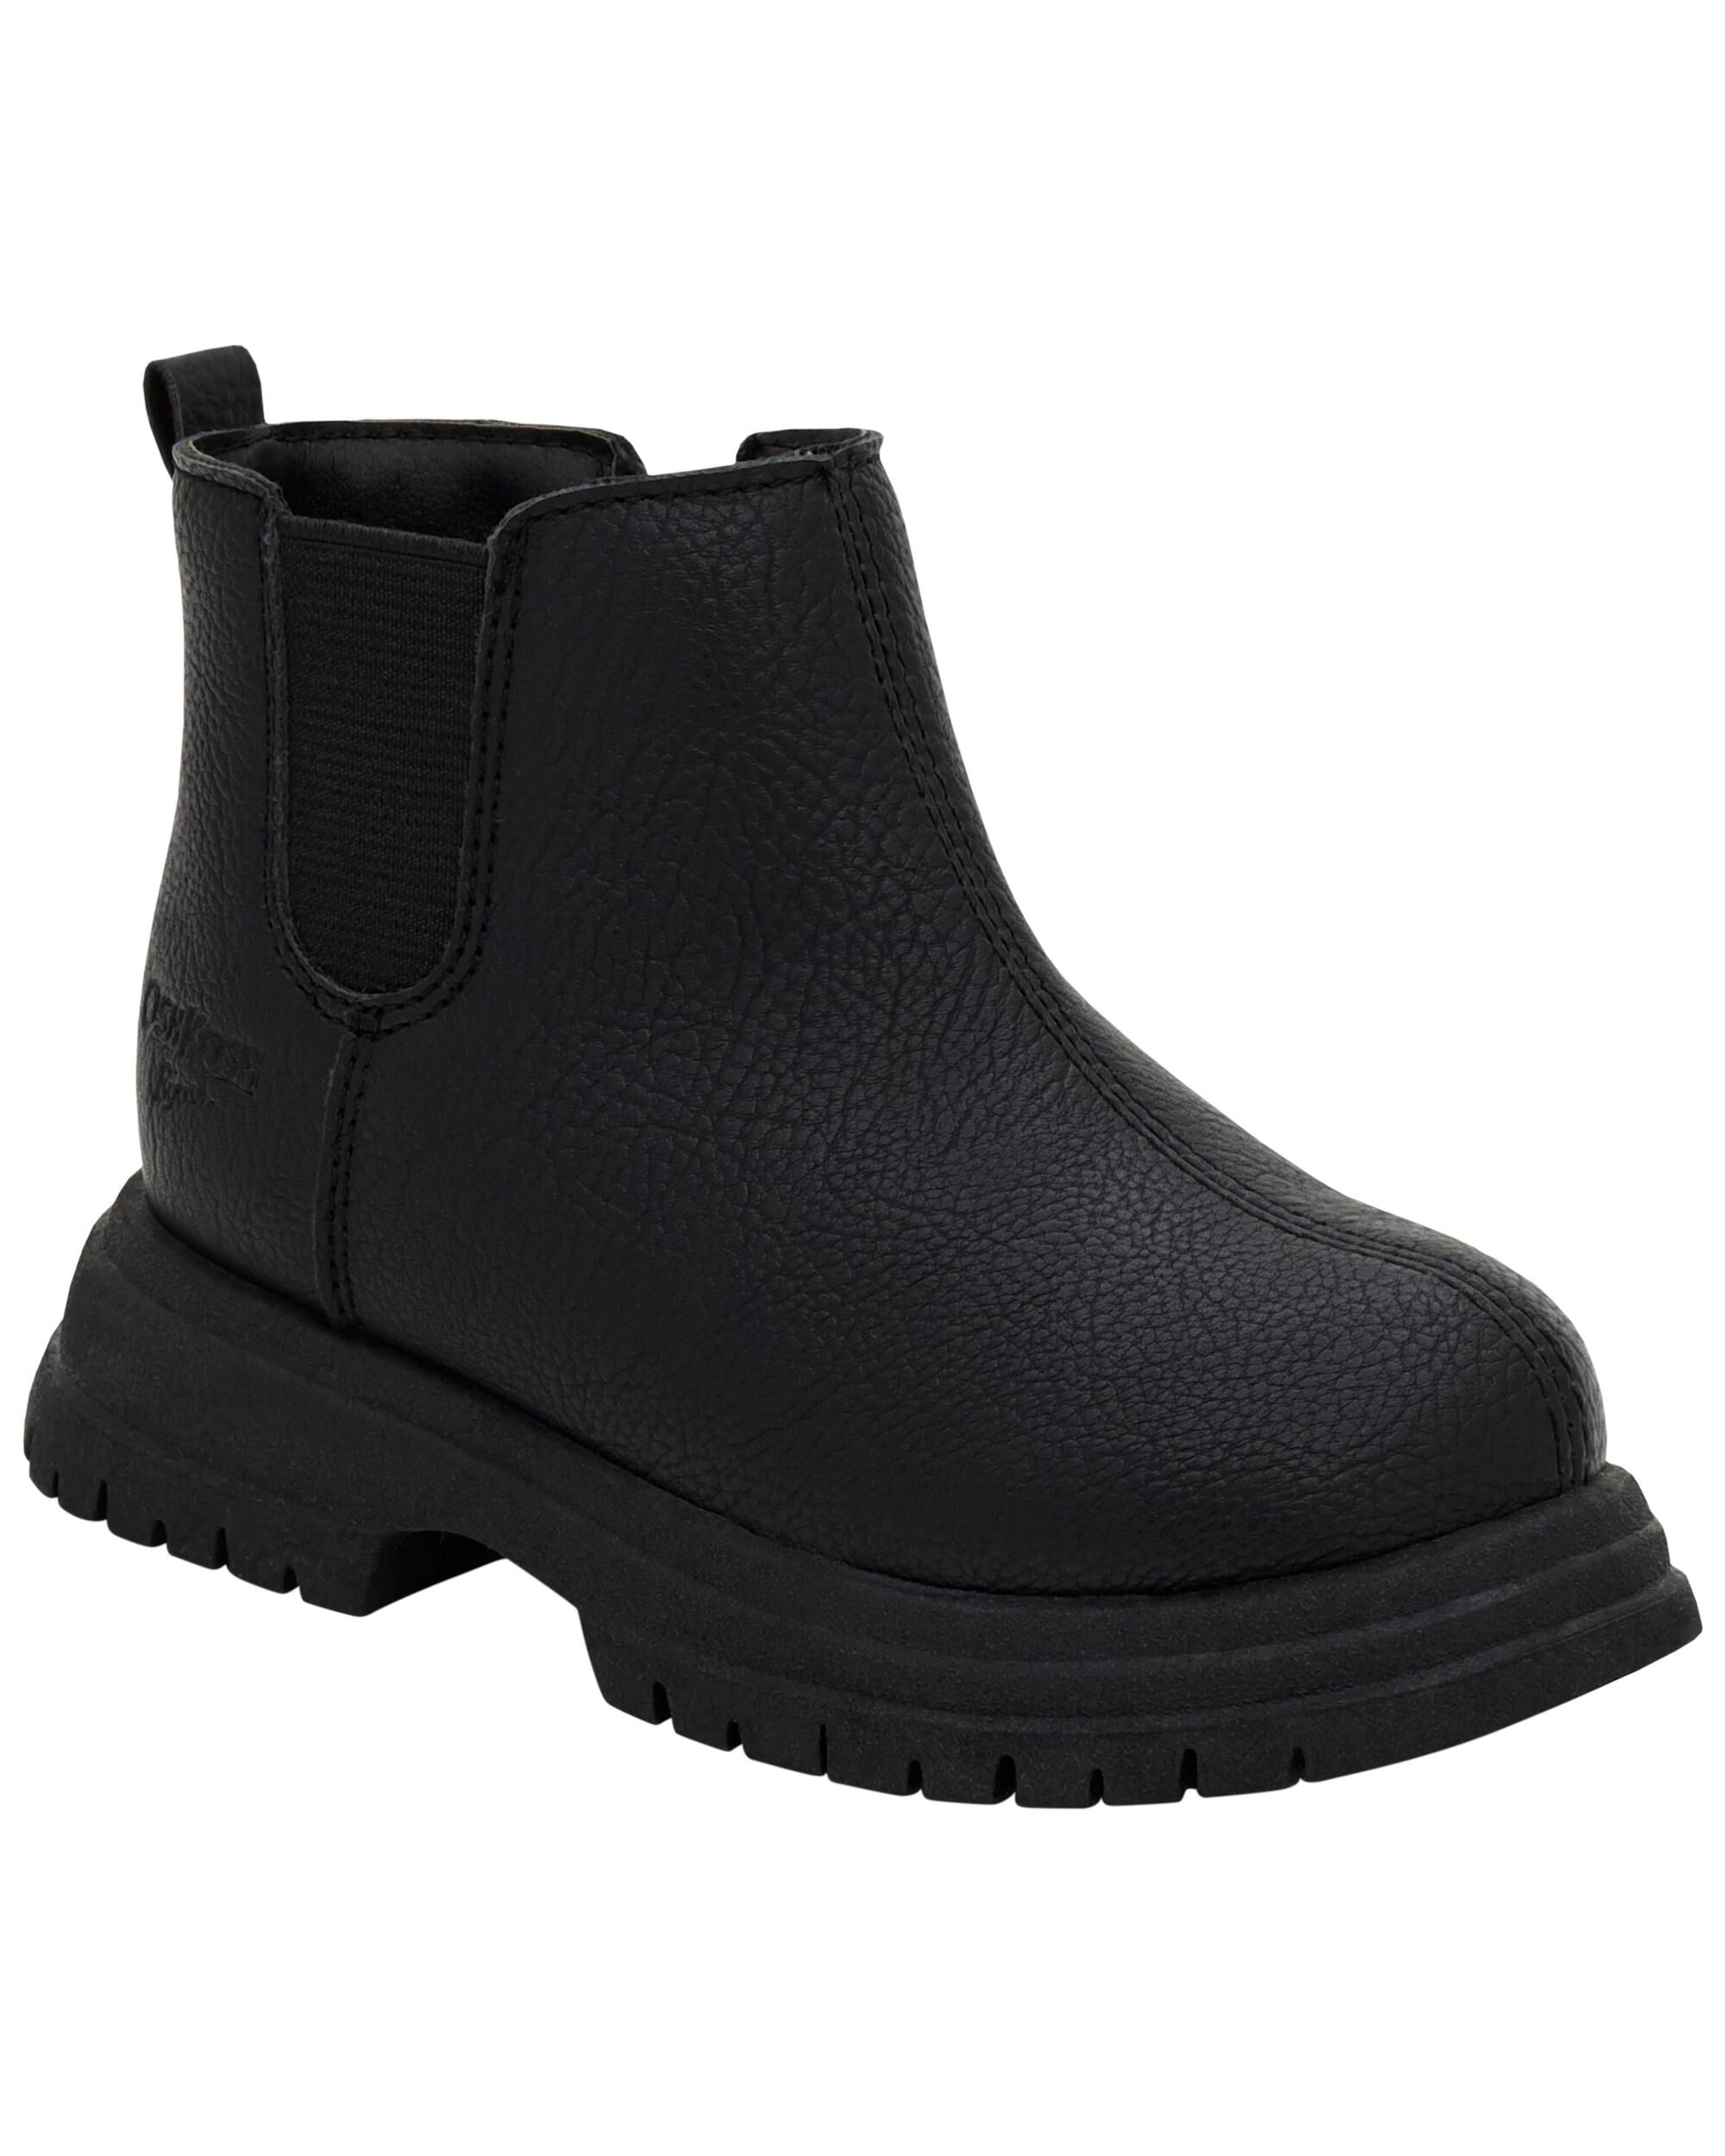 Carters Toddler Xandra Fashion Boots